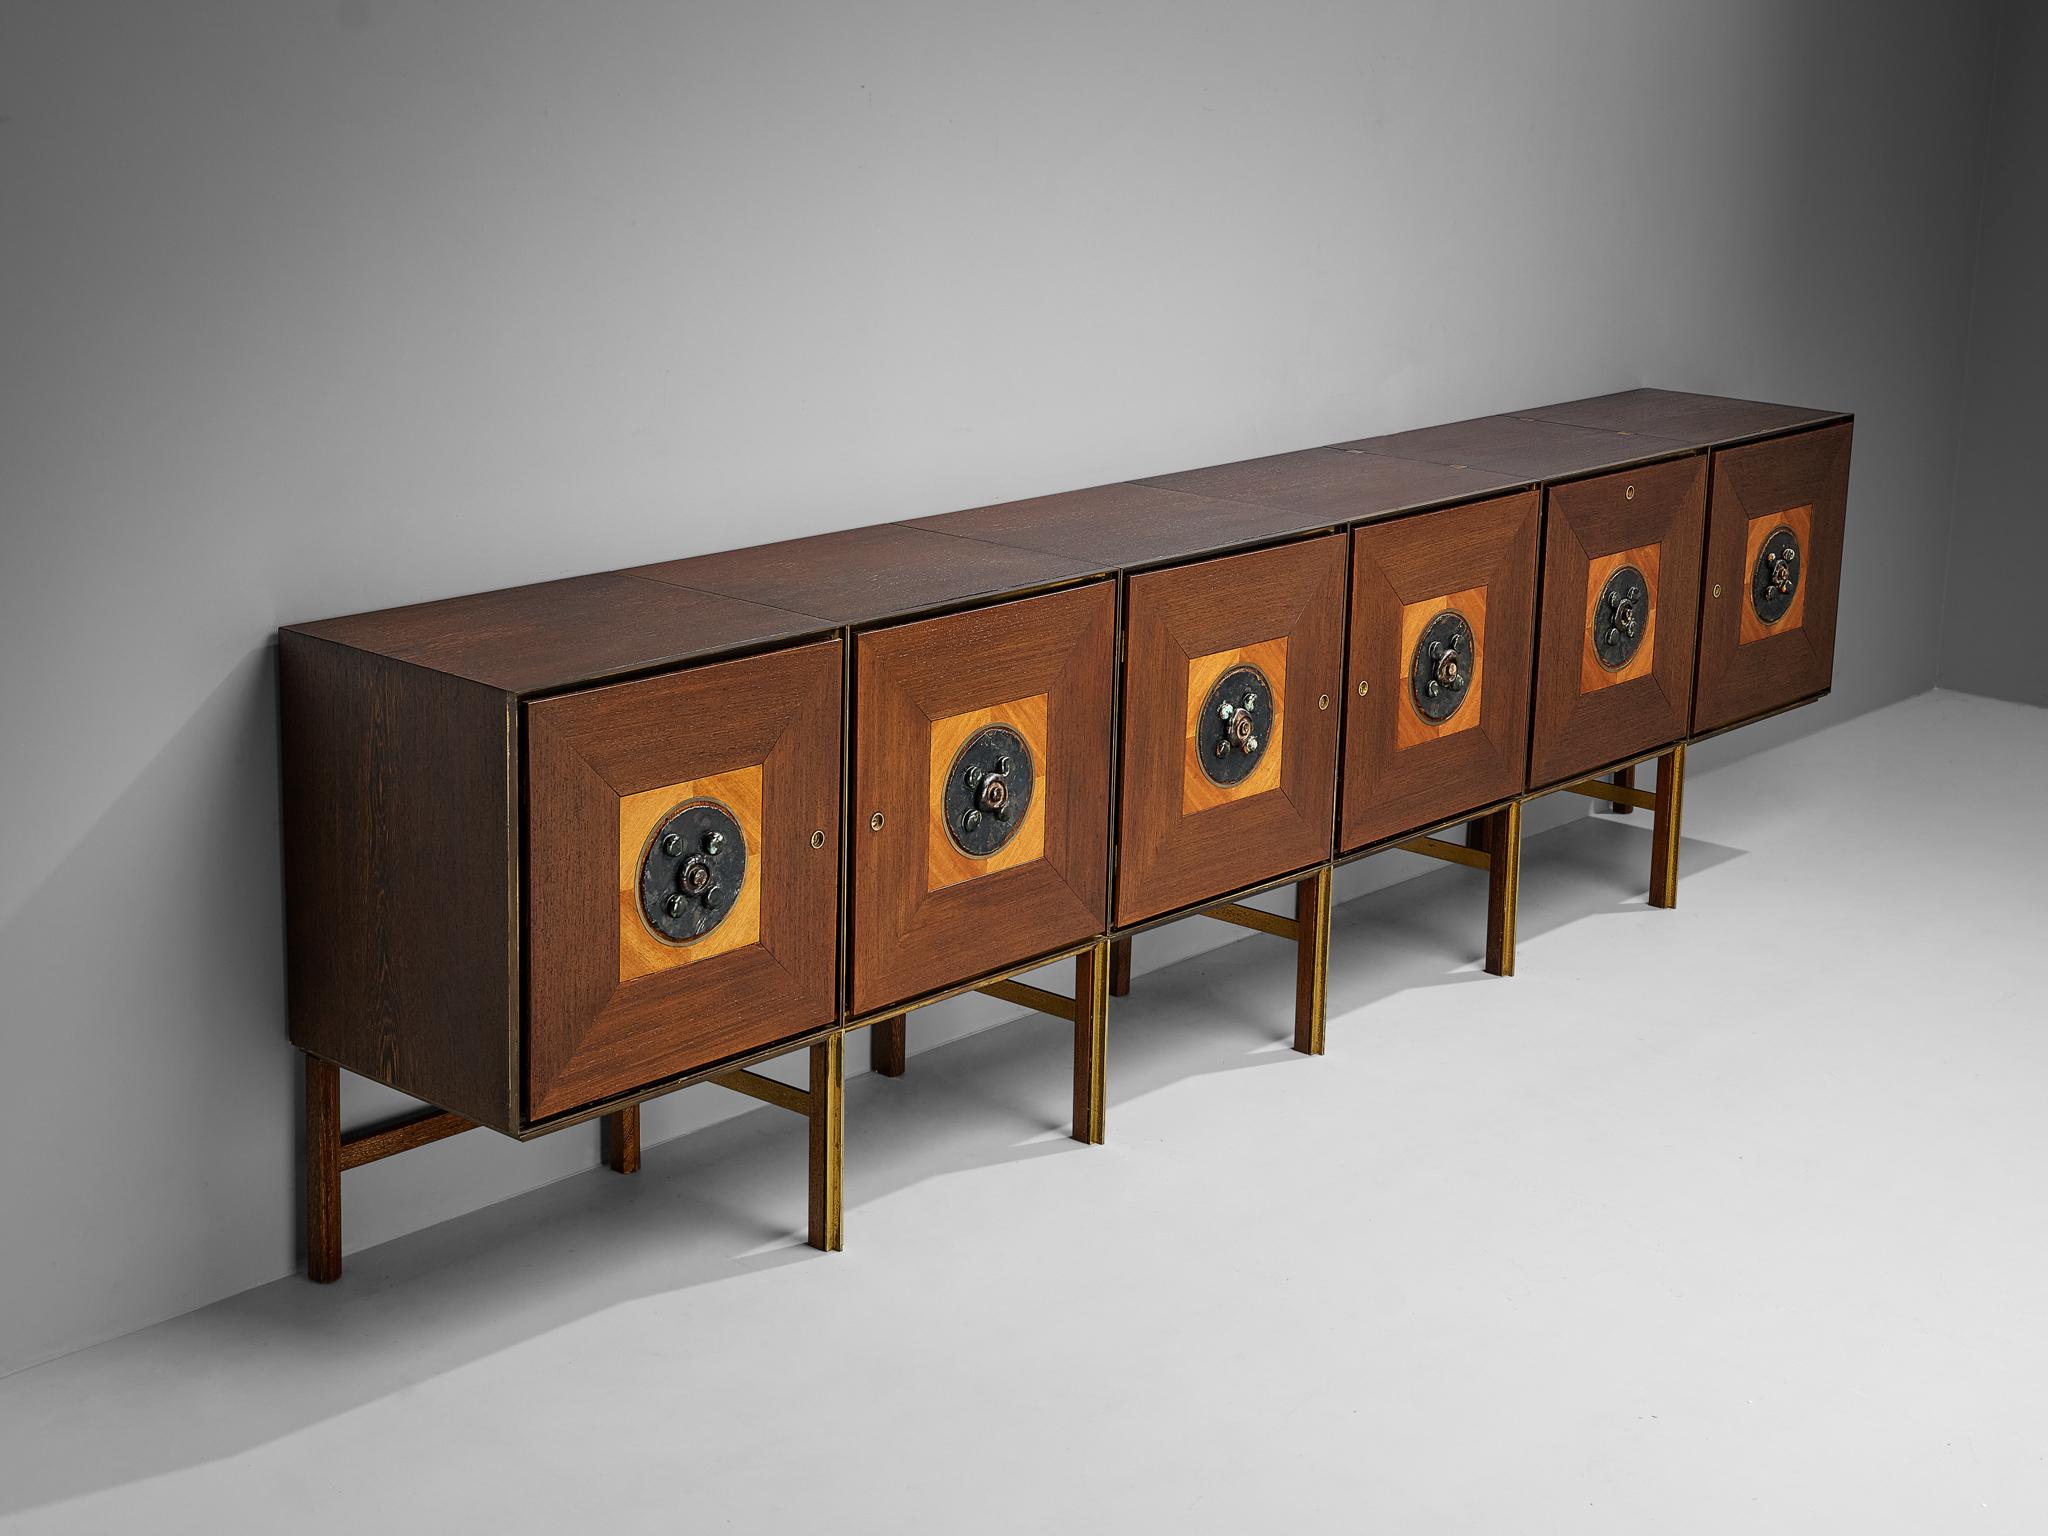 Sideboard, wengé, mahogany, brass, melamine, ceramic, Belgium, 1950s/1960s. 

This unique custom made sideboard is constructed in the finest manner. The elongated wooden corpus is executed in wengé wood, a natural material that has an incredibly,